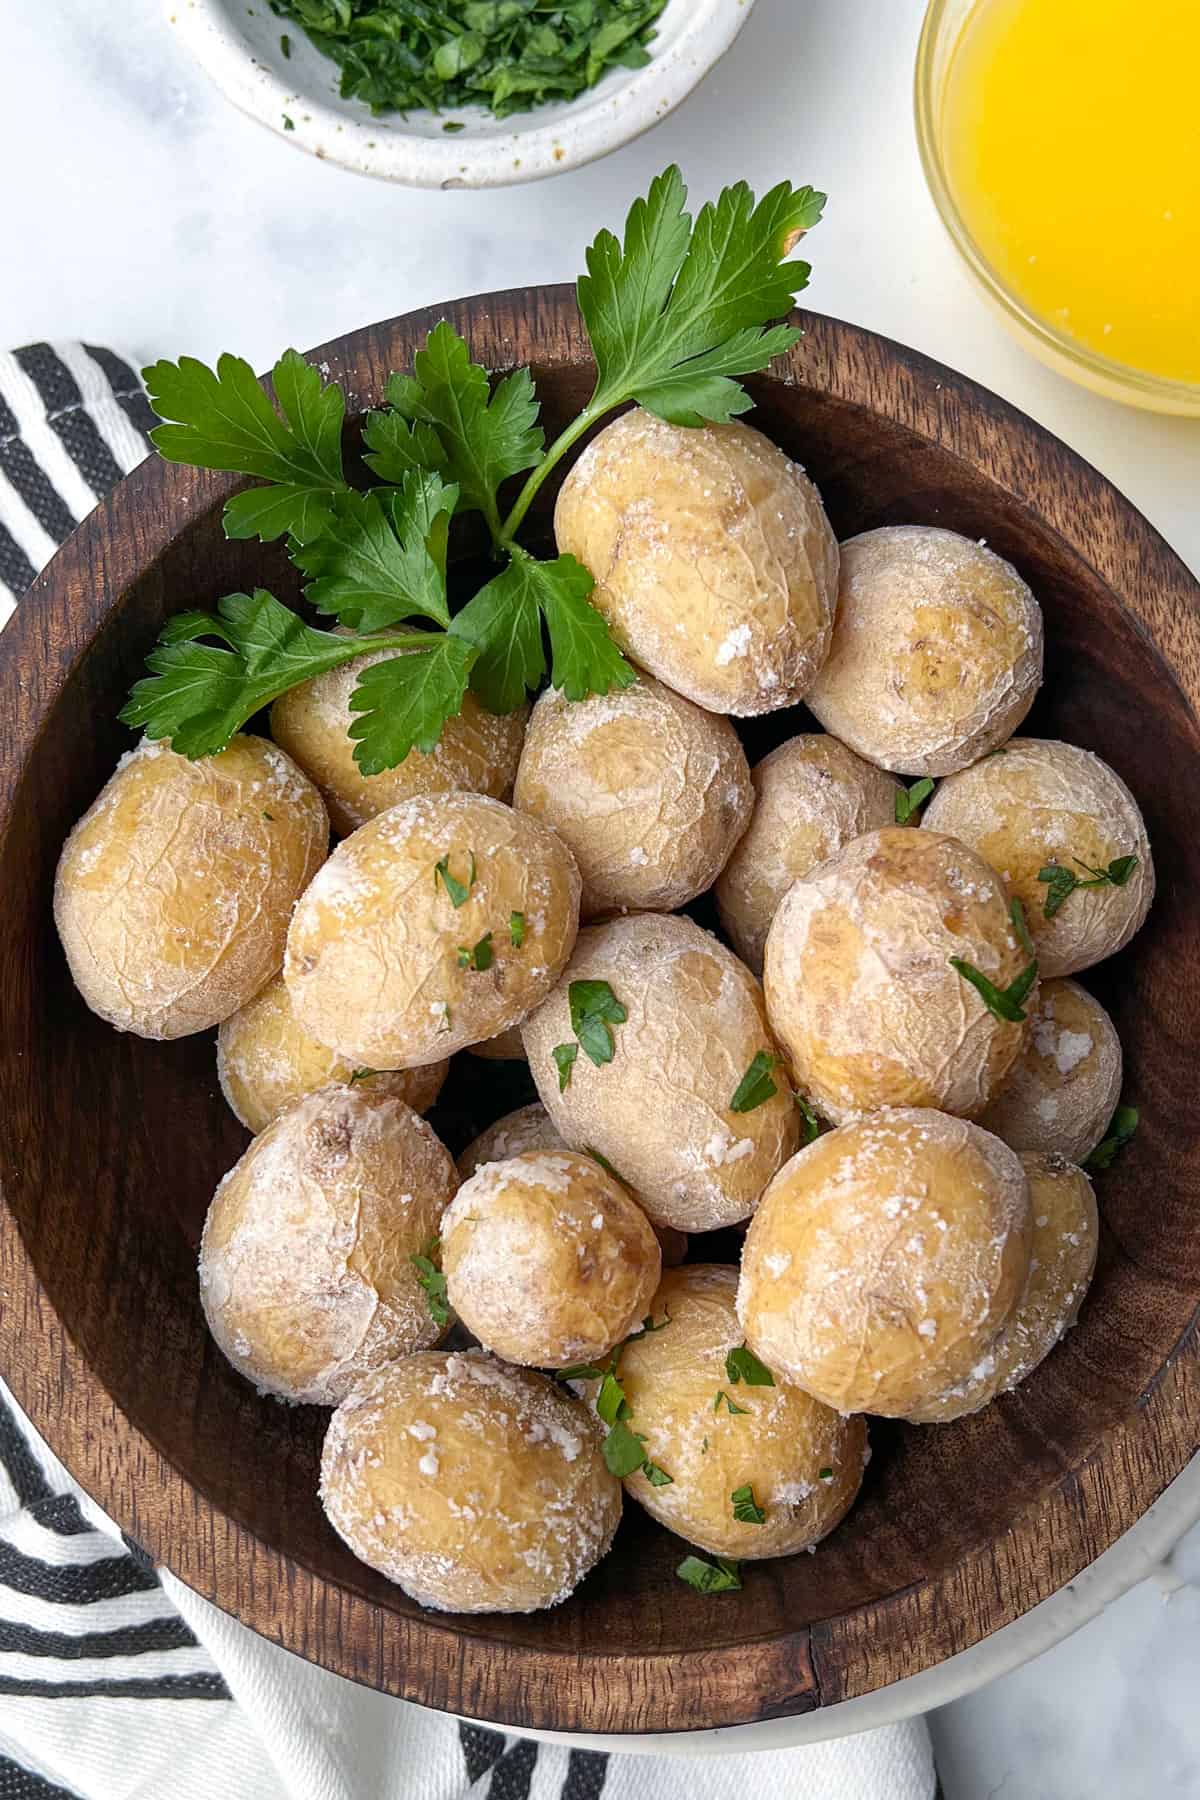 salt-crusted new potatoes in a wooden bowl garnished with parsley